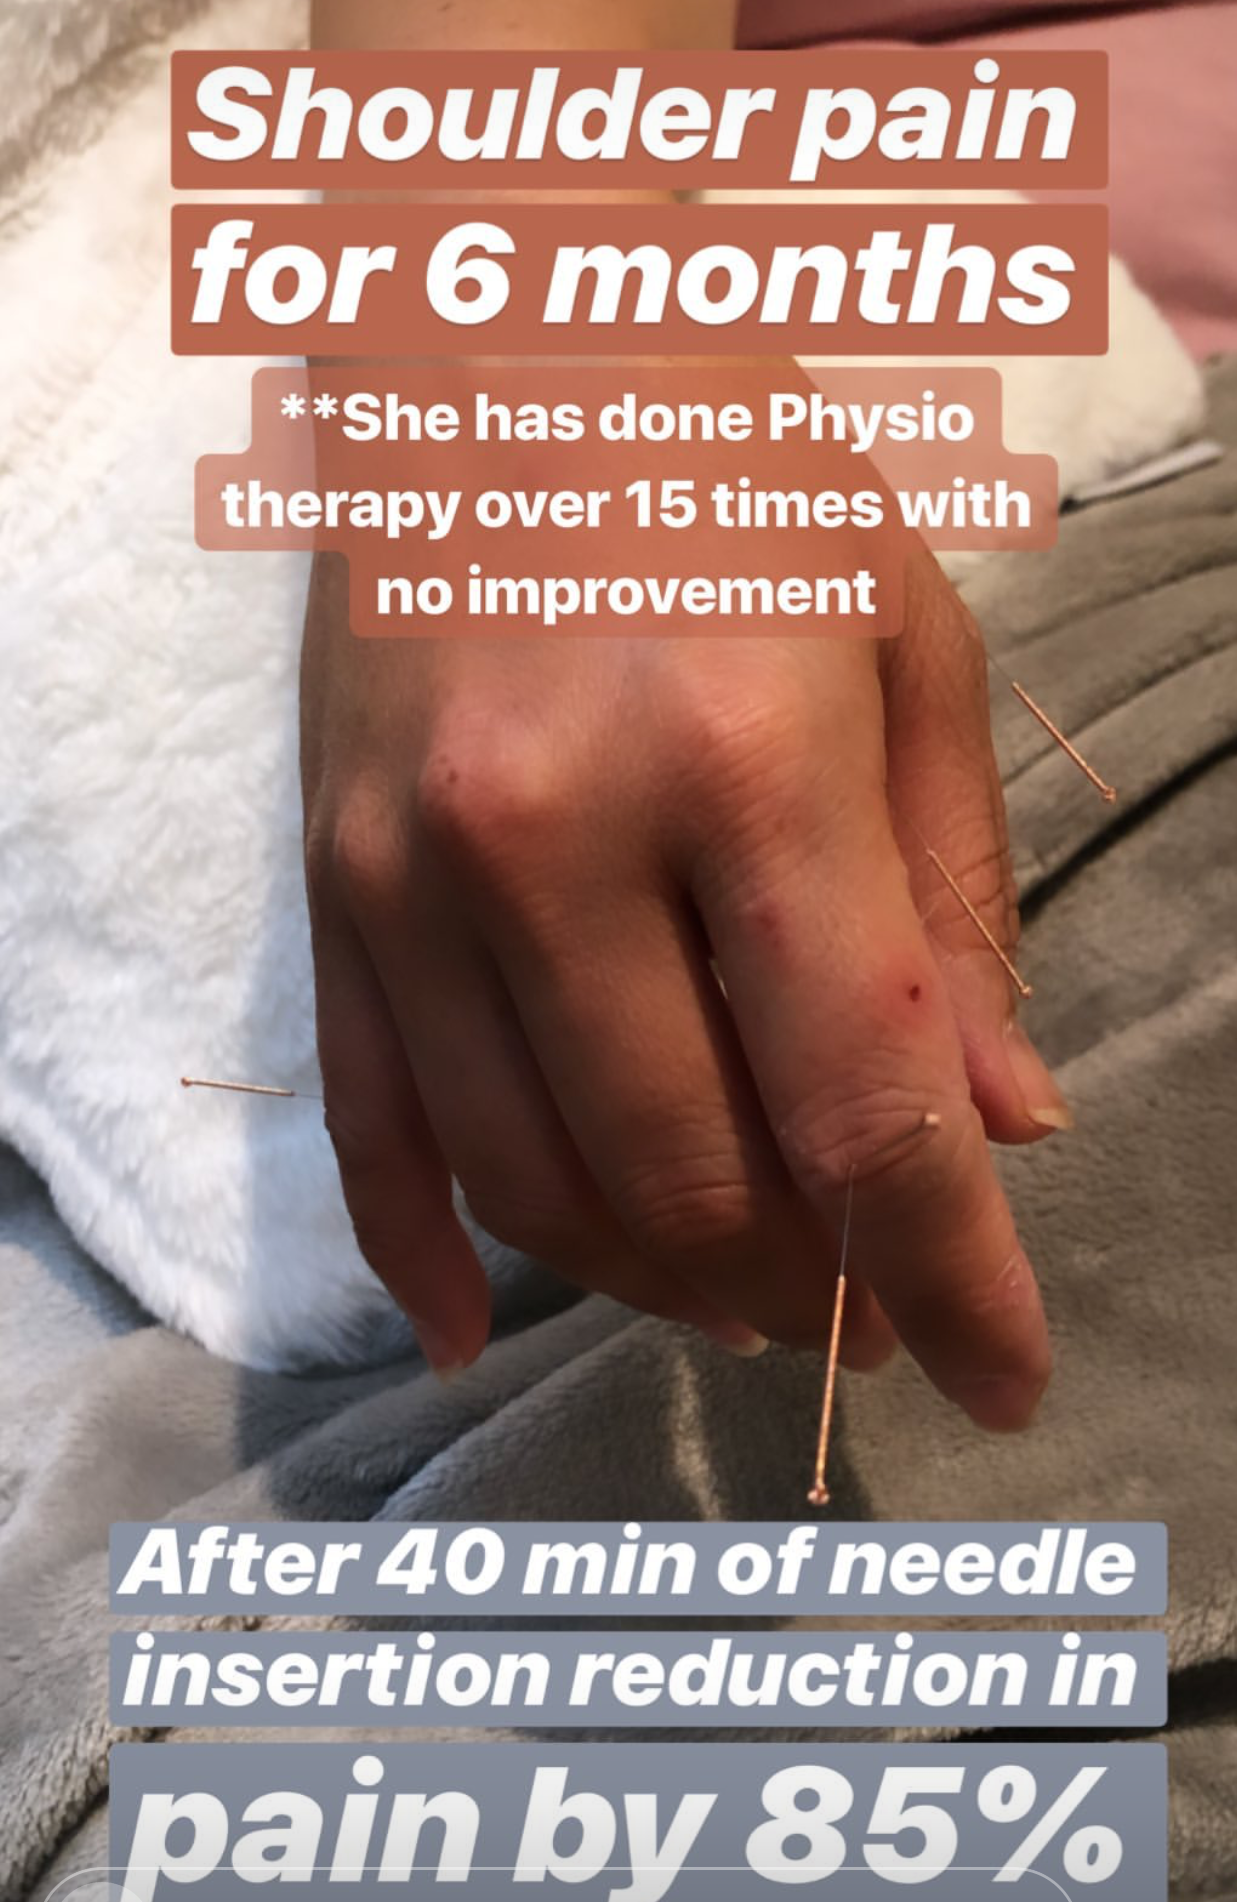  SuJok acupuncture in Vancoouver used to successfully treat patient with pain syndrome caused by the inability to move shoulder even after 6 months of unsuccessful physiotherapy. Patient was able to immediately feel 85% less pain 